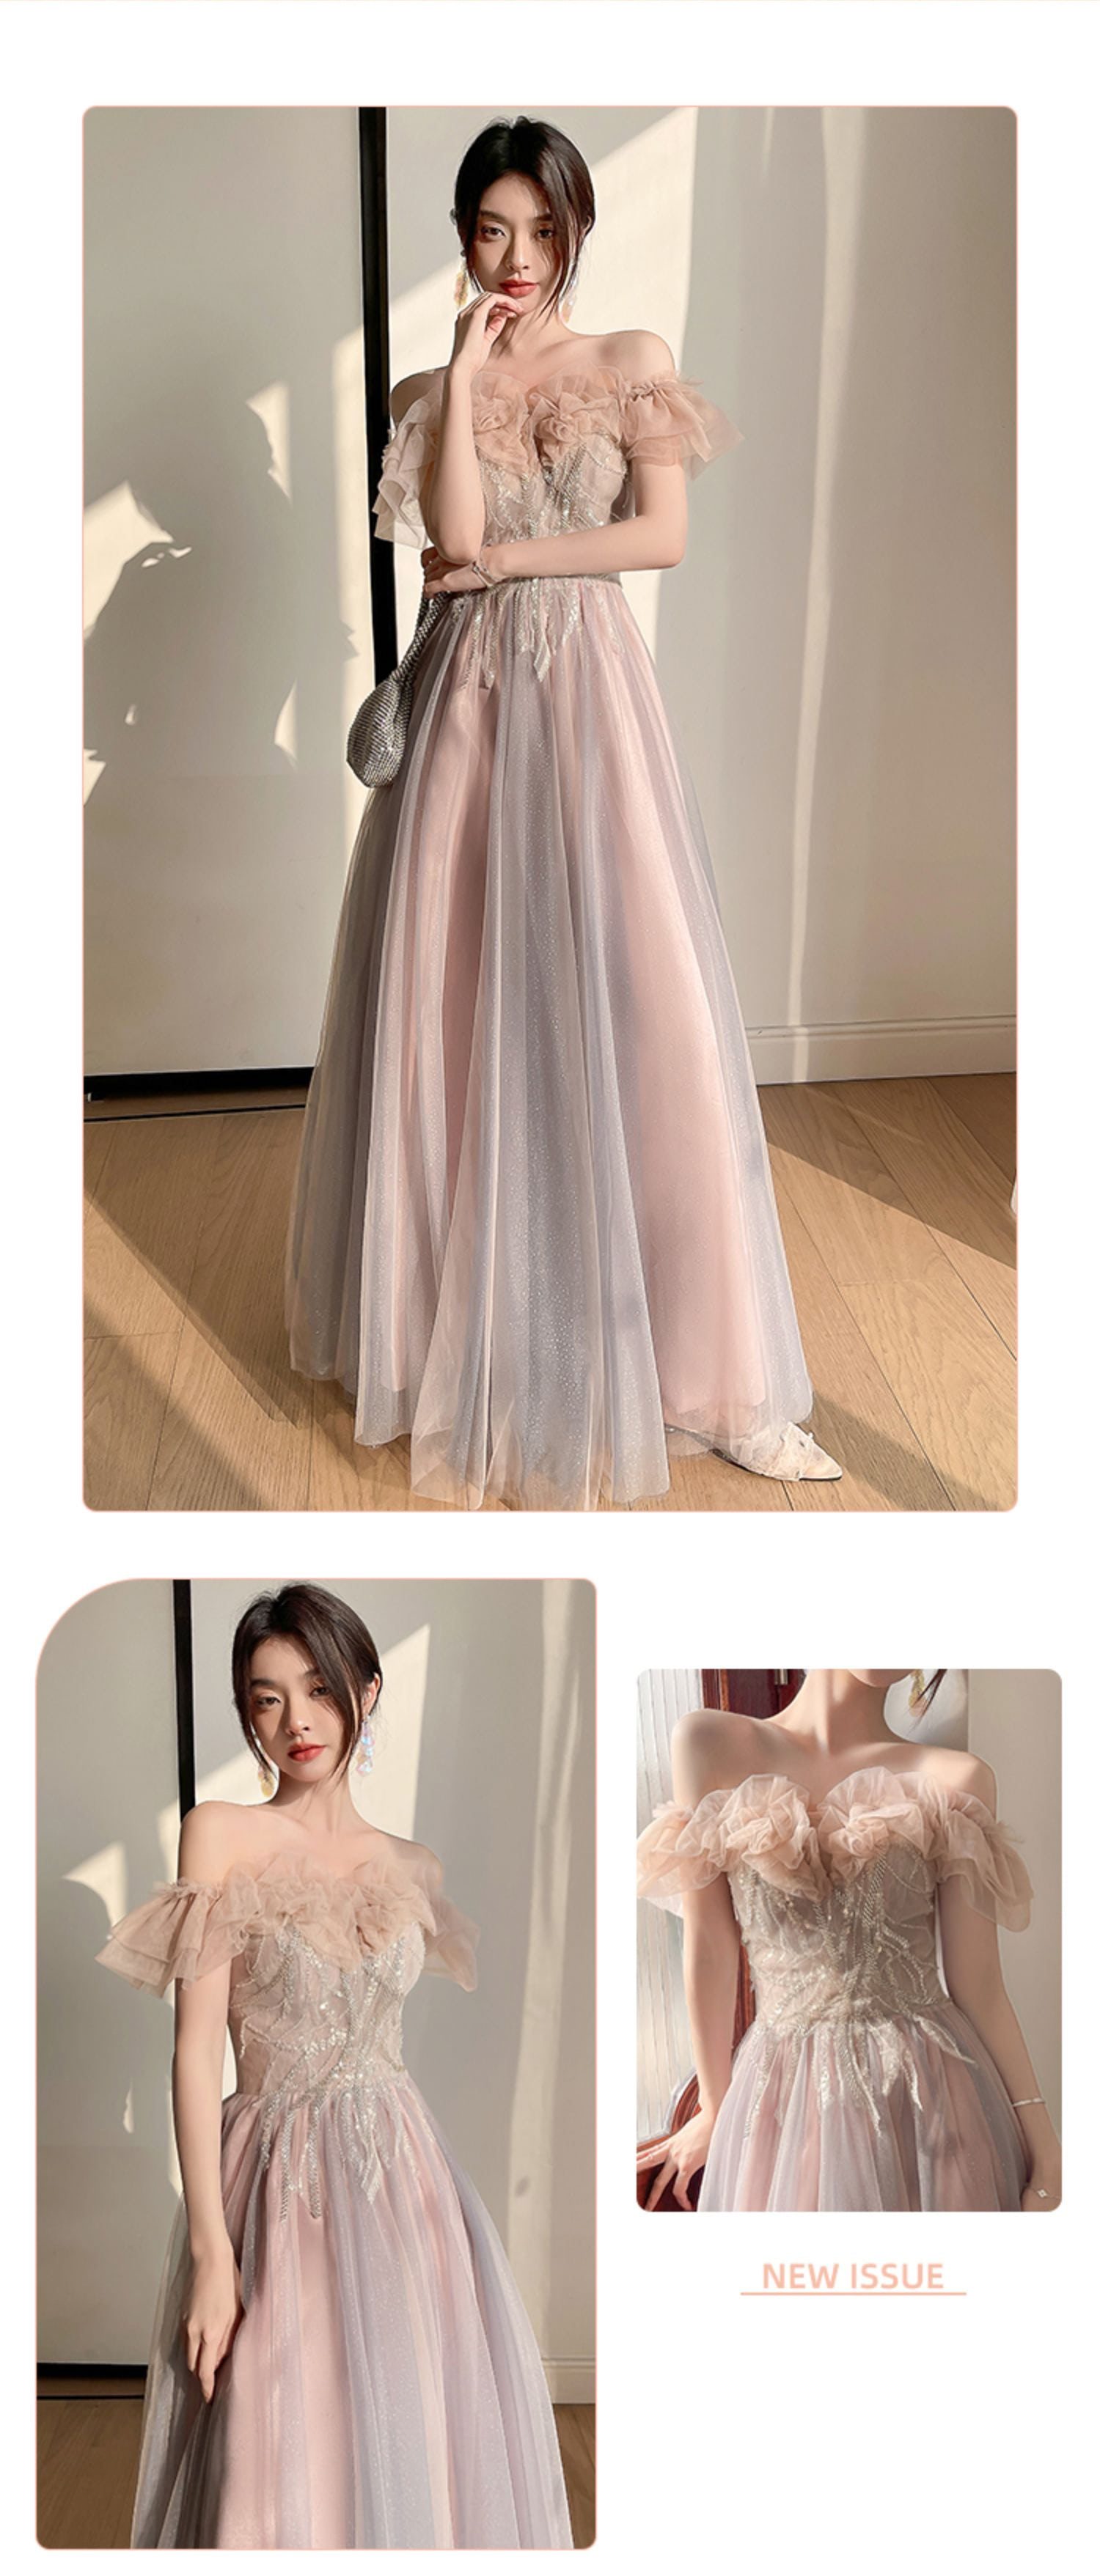 Elegant-Pale-Pink-Maxi-Bridesmaid-Dress-Long-Party-Ball-Gown15